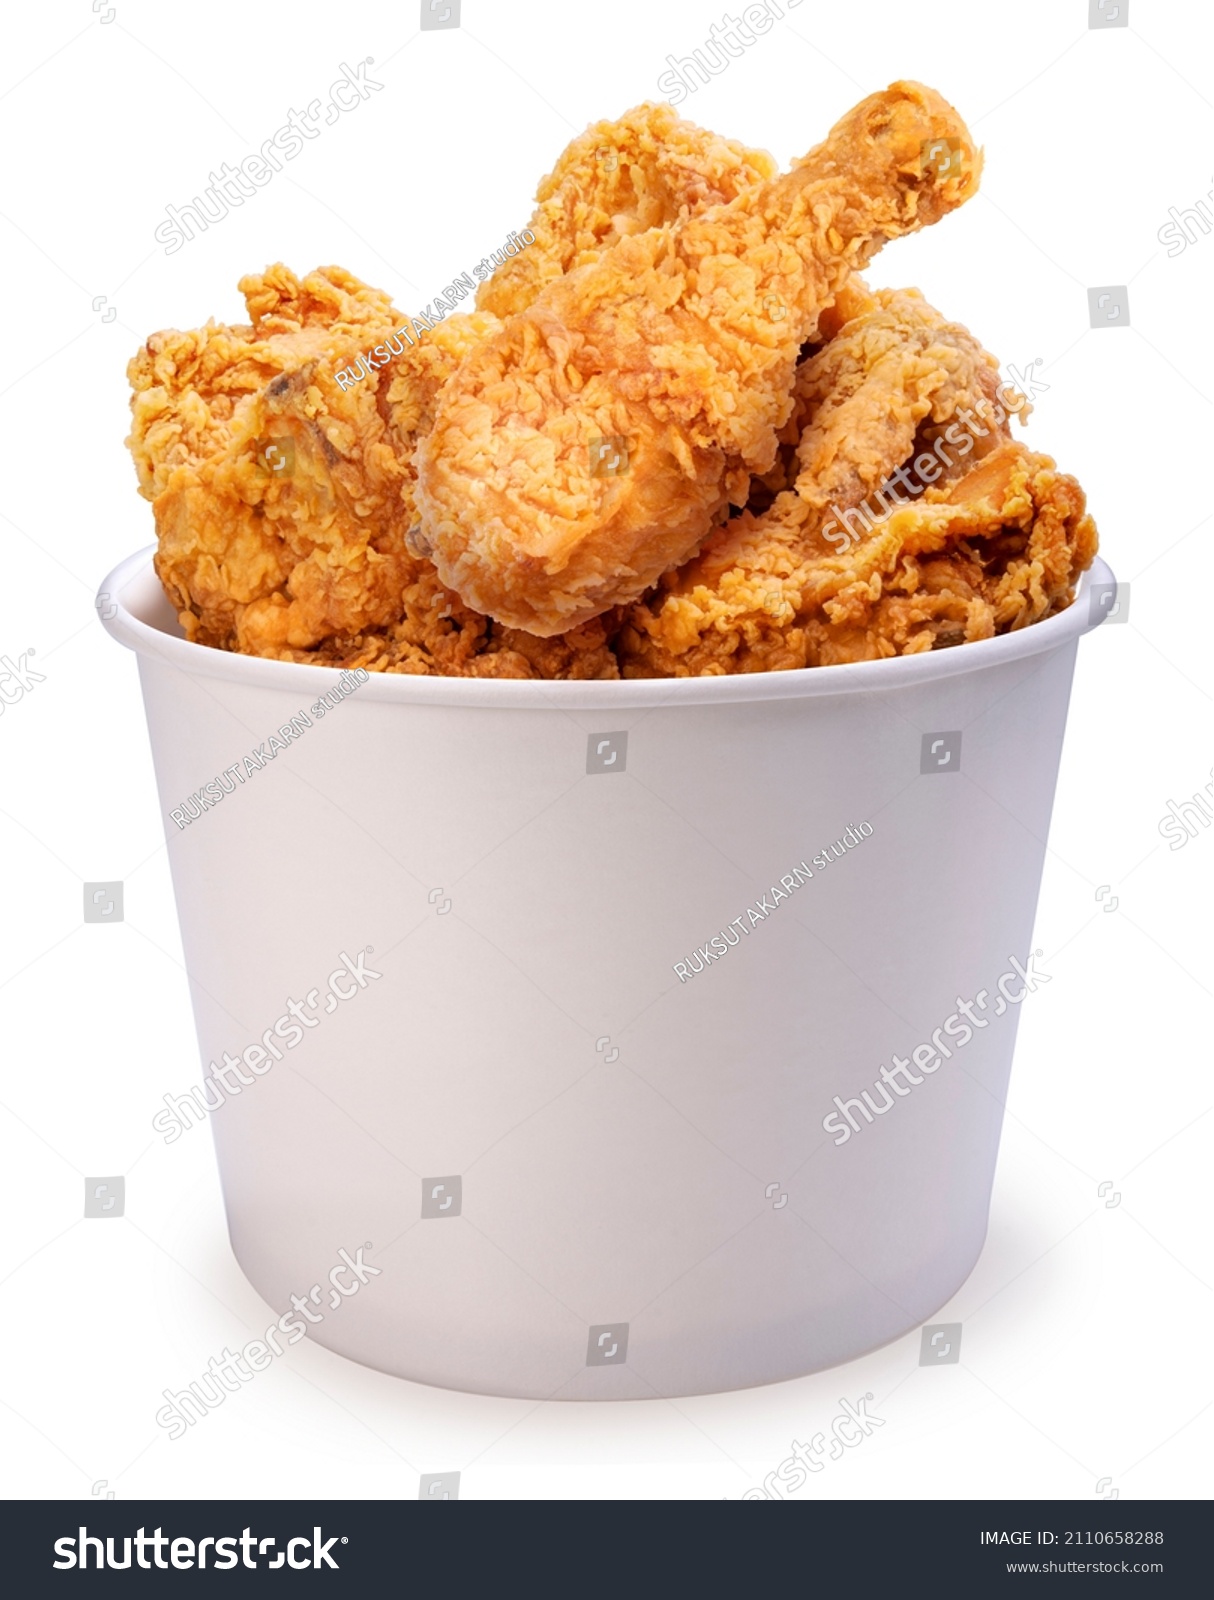 Fried chicken in paper bucket isolated on white background, Fried chicken on white With clipping path. #2110658288